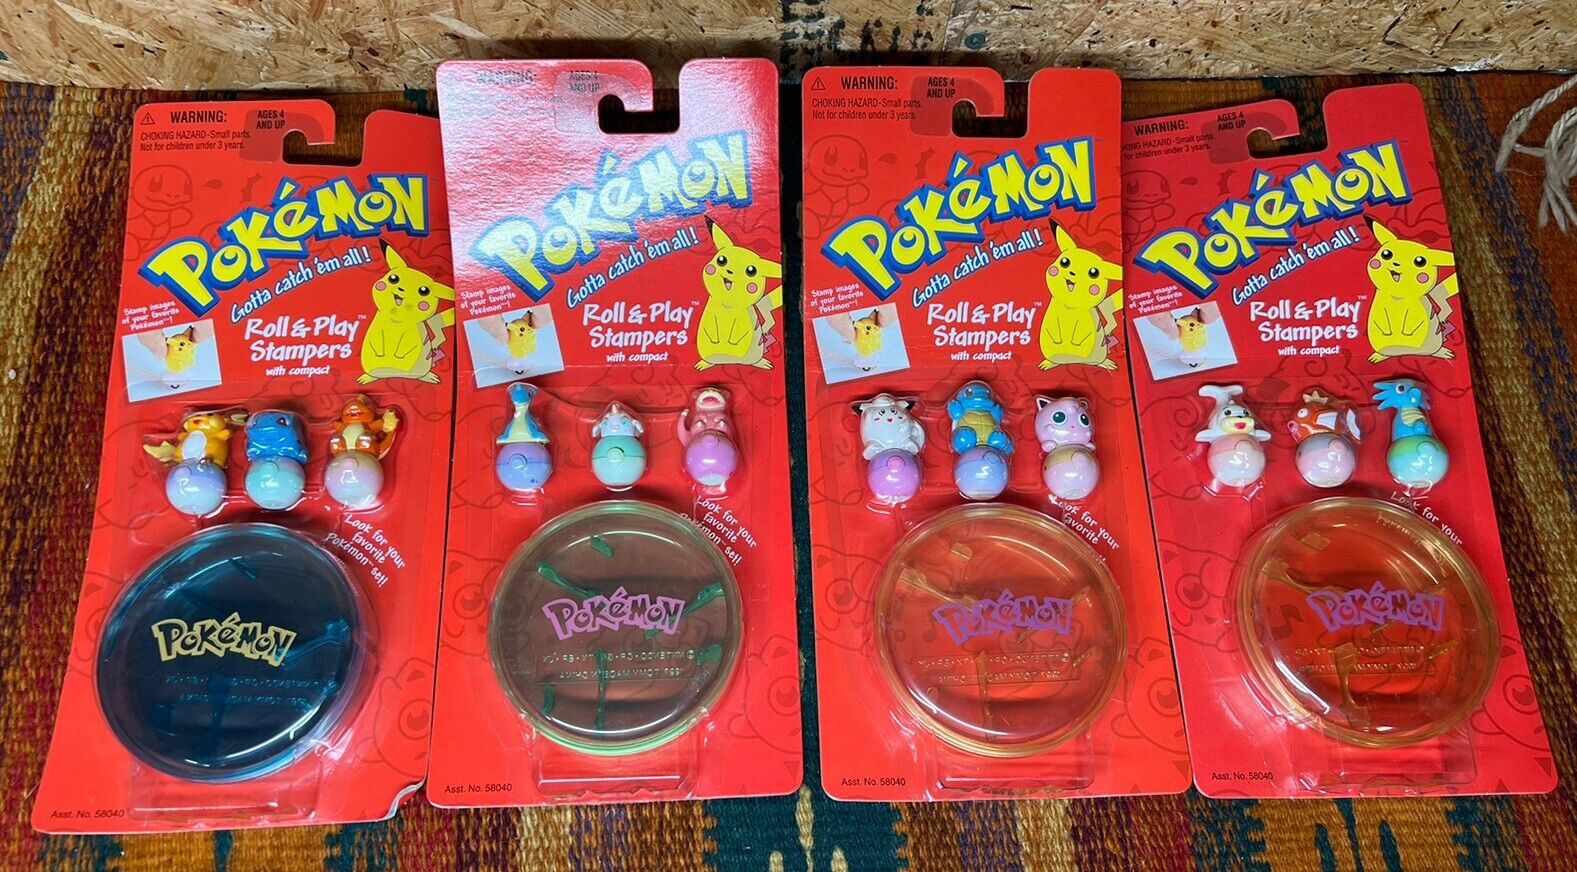 Vintage 1999 Pokemon Roll & Play Stampers Stamps Set Of 4 SEALED BRAND NEW